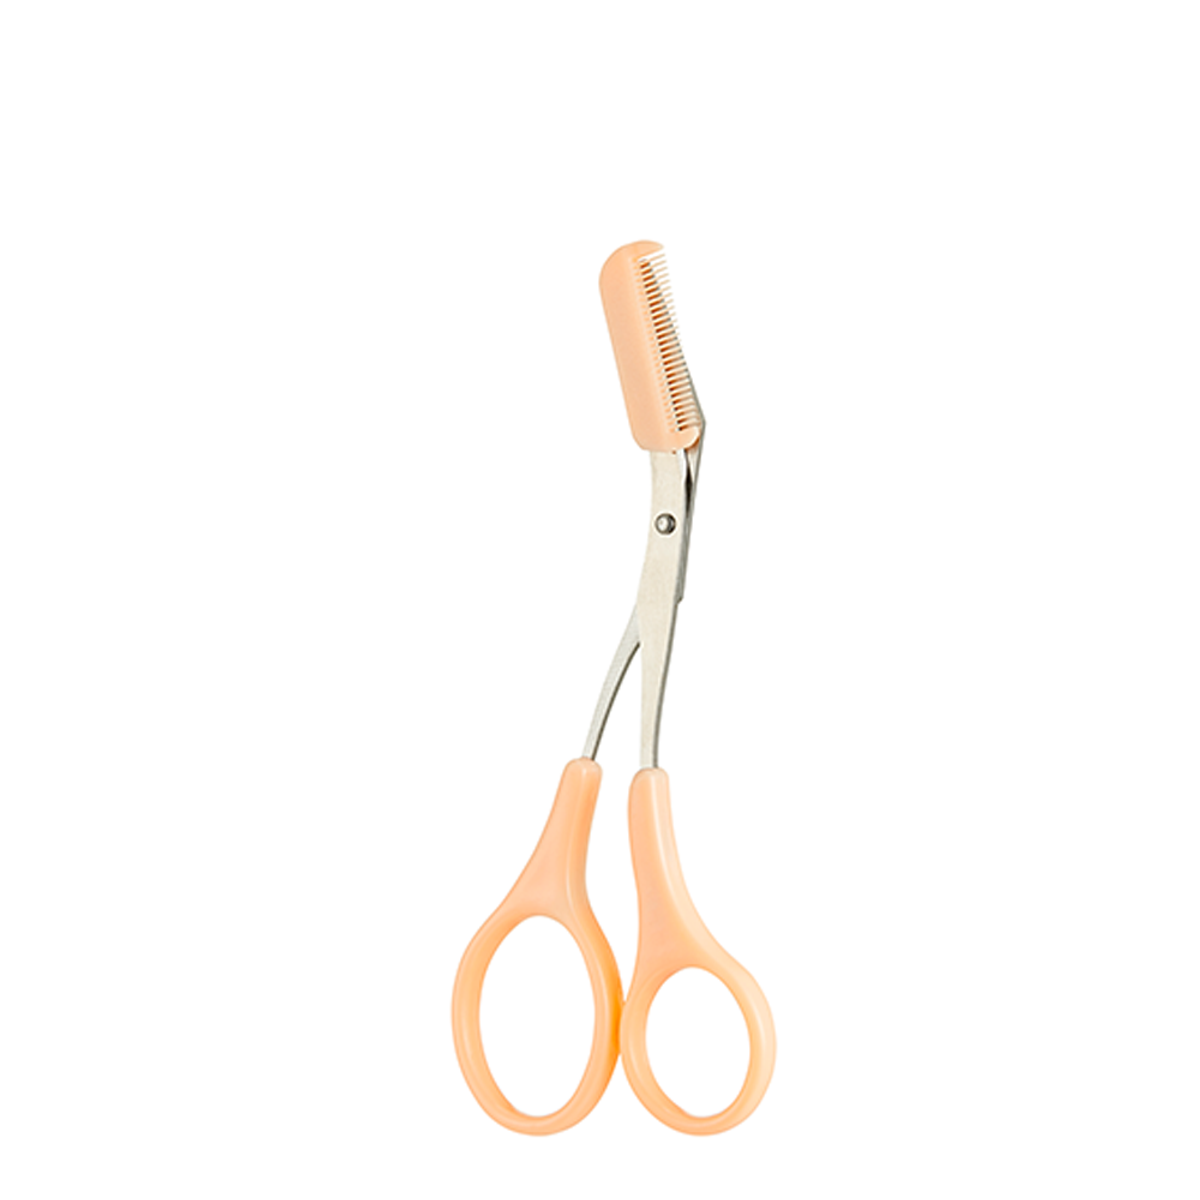 keo-tia-long-may-daily-beauty-tools-eyebrow-trimming-scissors-with-comb-2